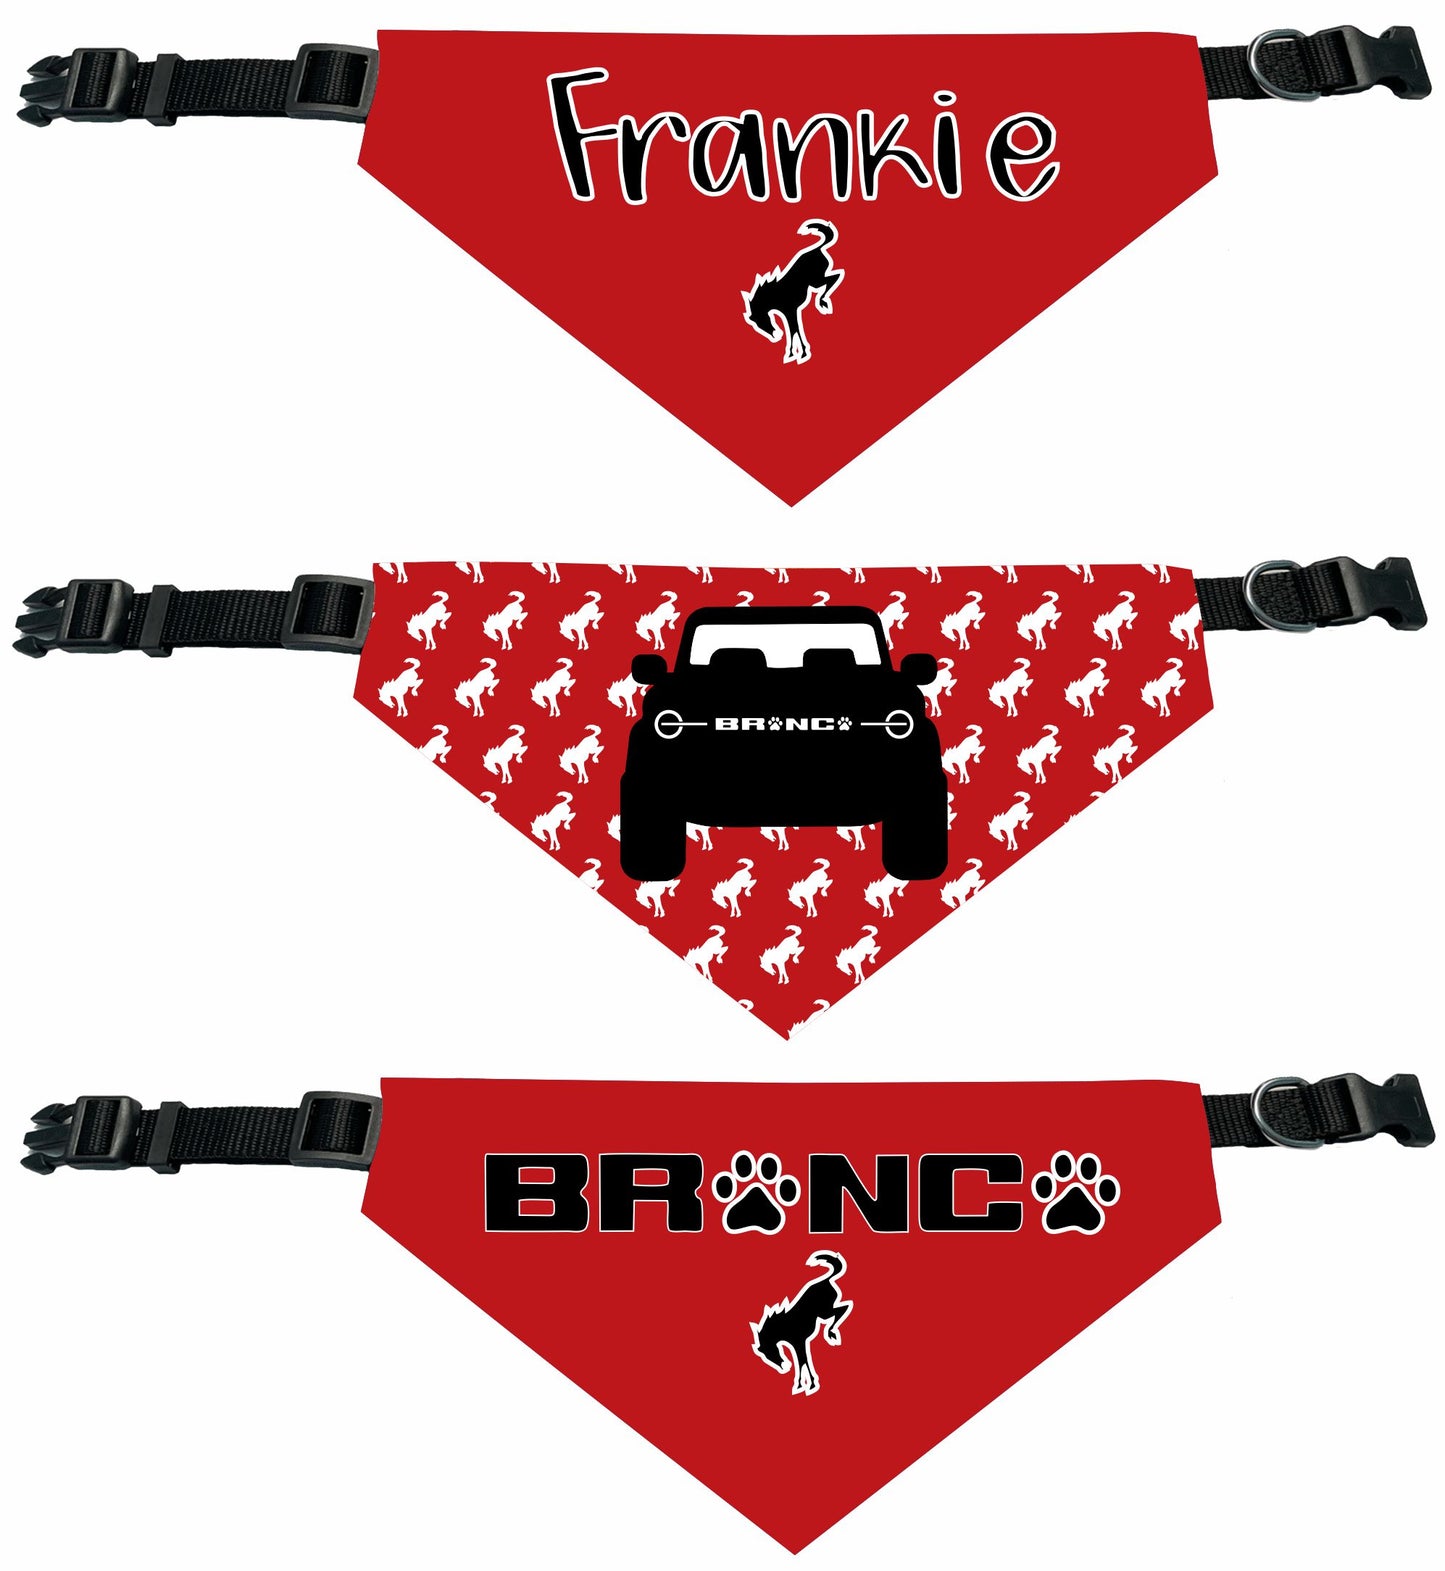 Bronco Personalized Reversable Dog Bandana (Red, Yellow and Green)